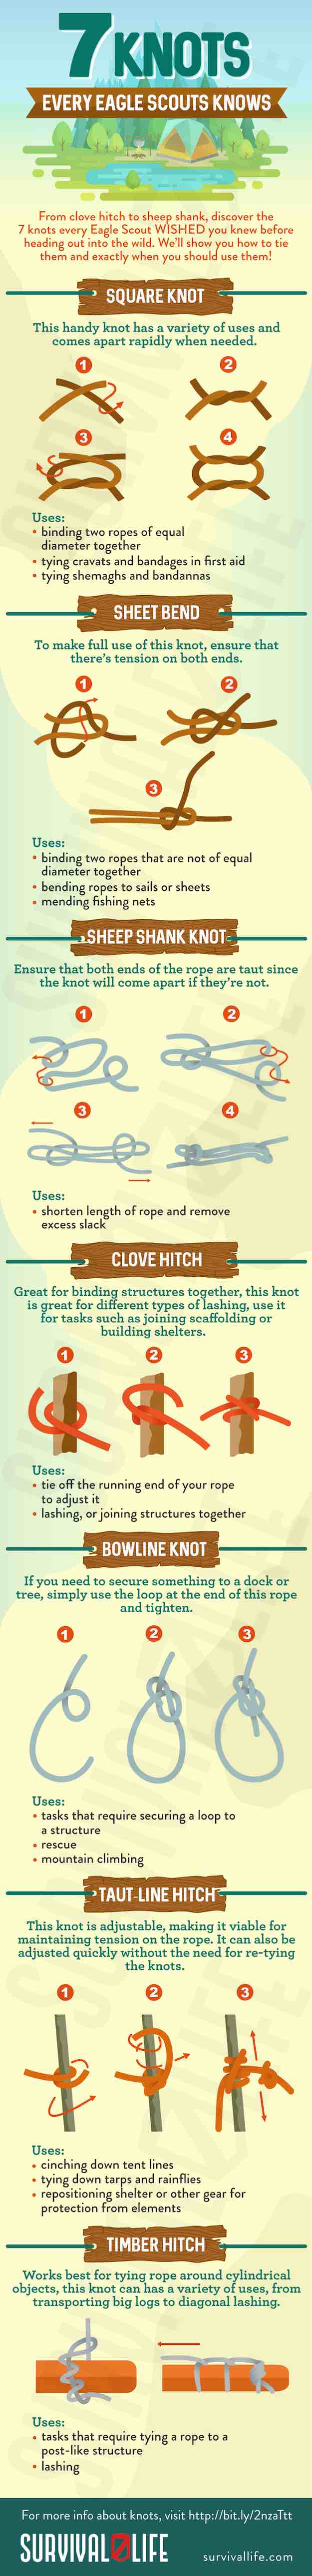 Infographic | Knots Every Eagle Scout Knows